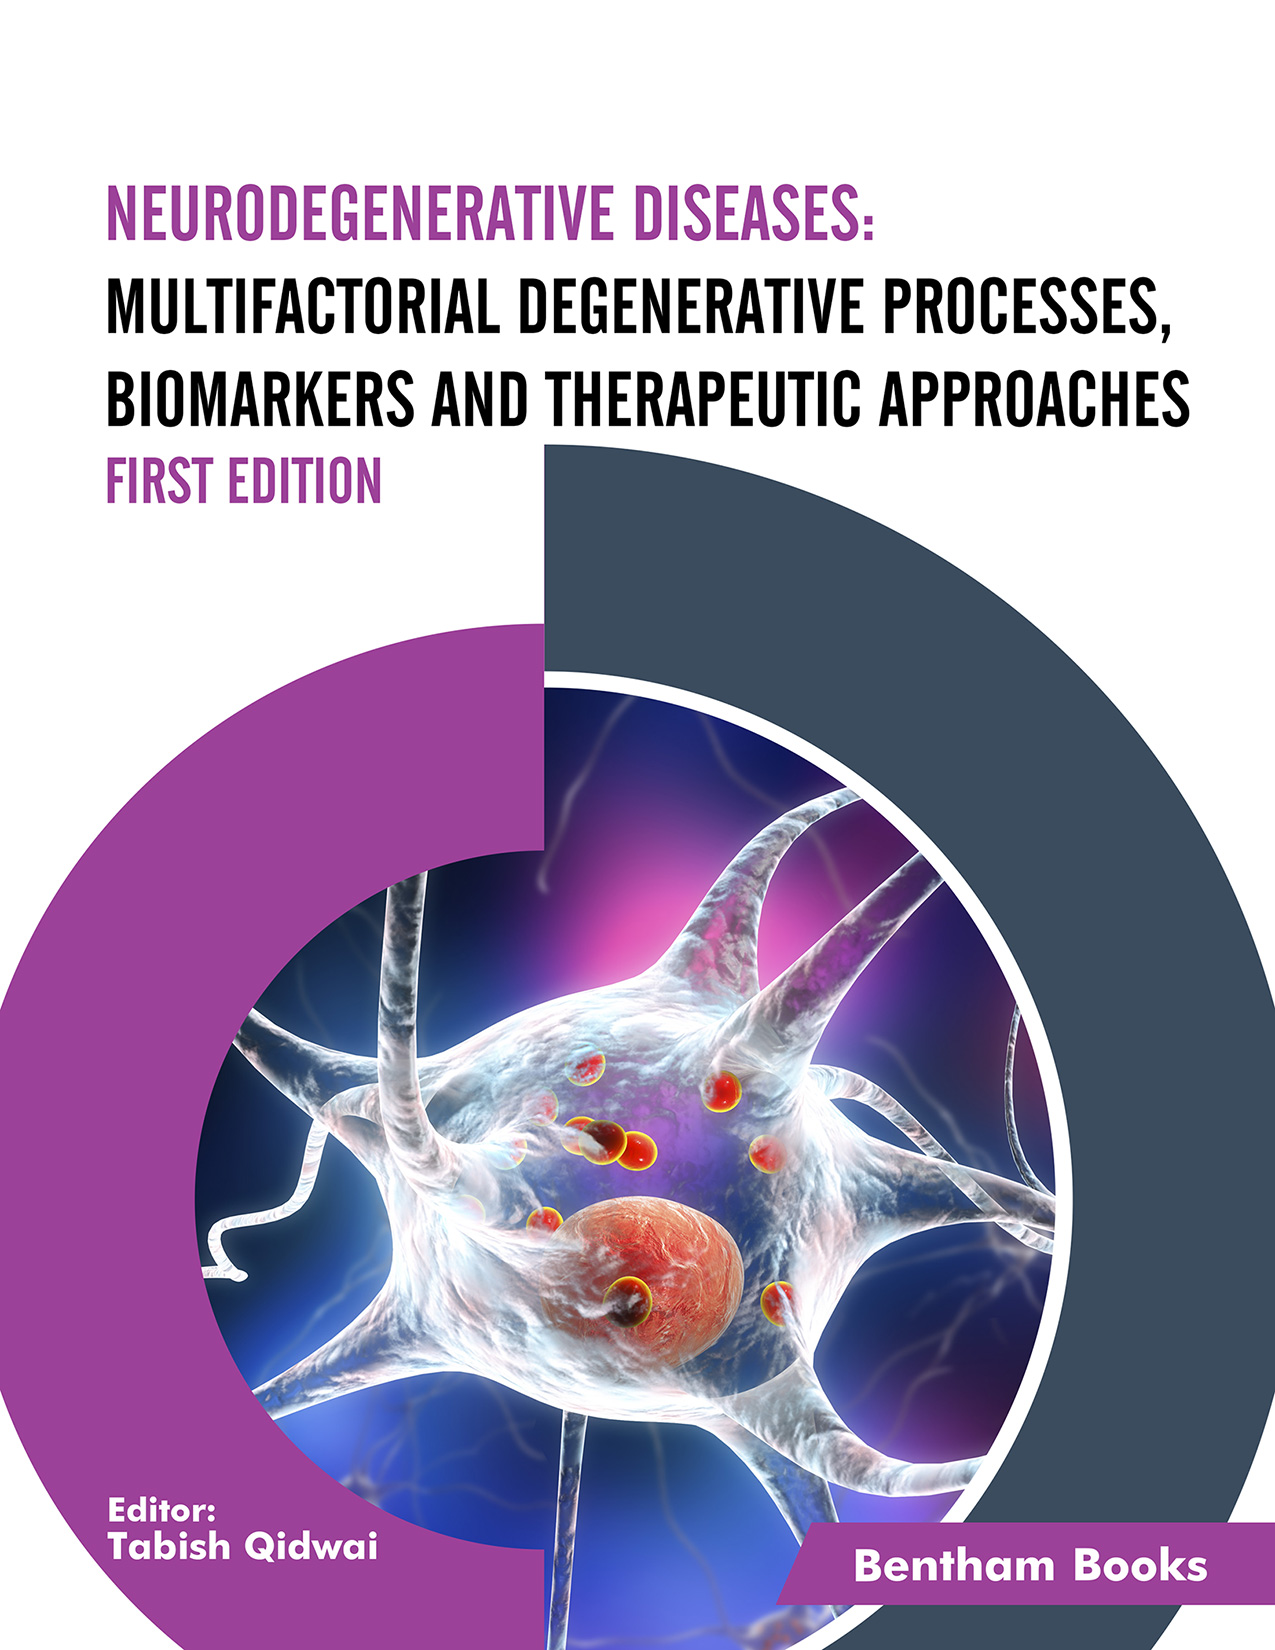 Neurodegenerative Diseases: Multifactorial Degenerative Processes, Biomarkers and Therapeutic Approaches